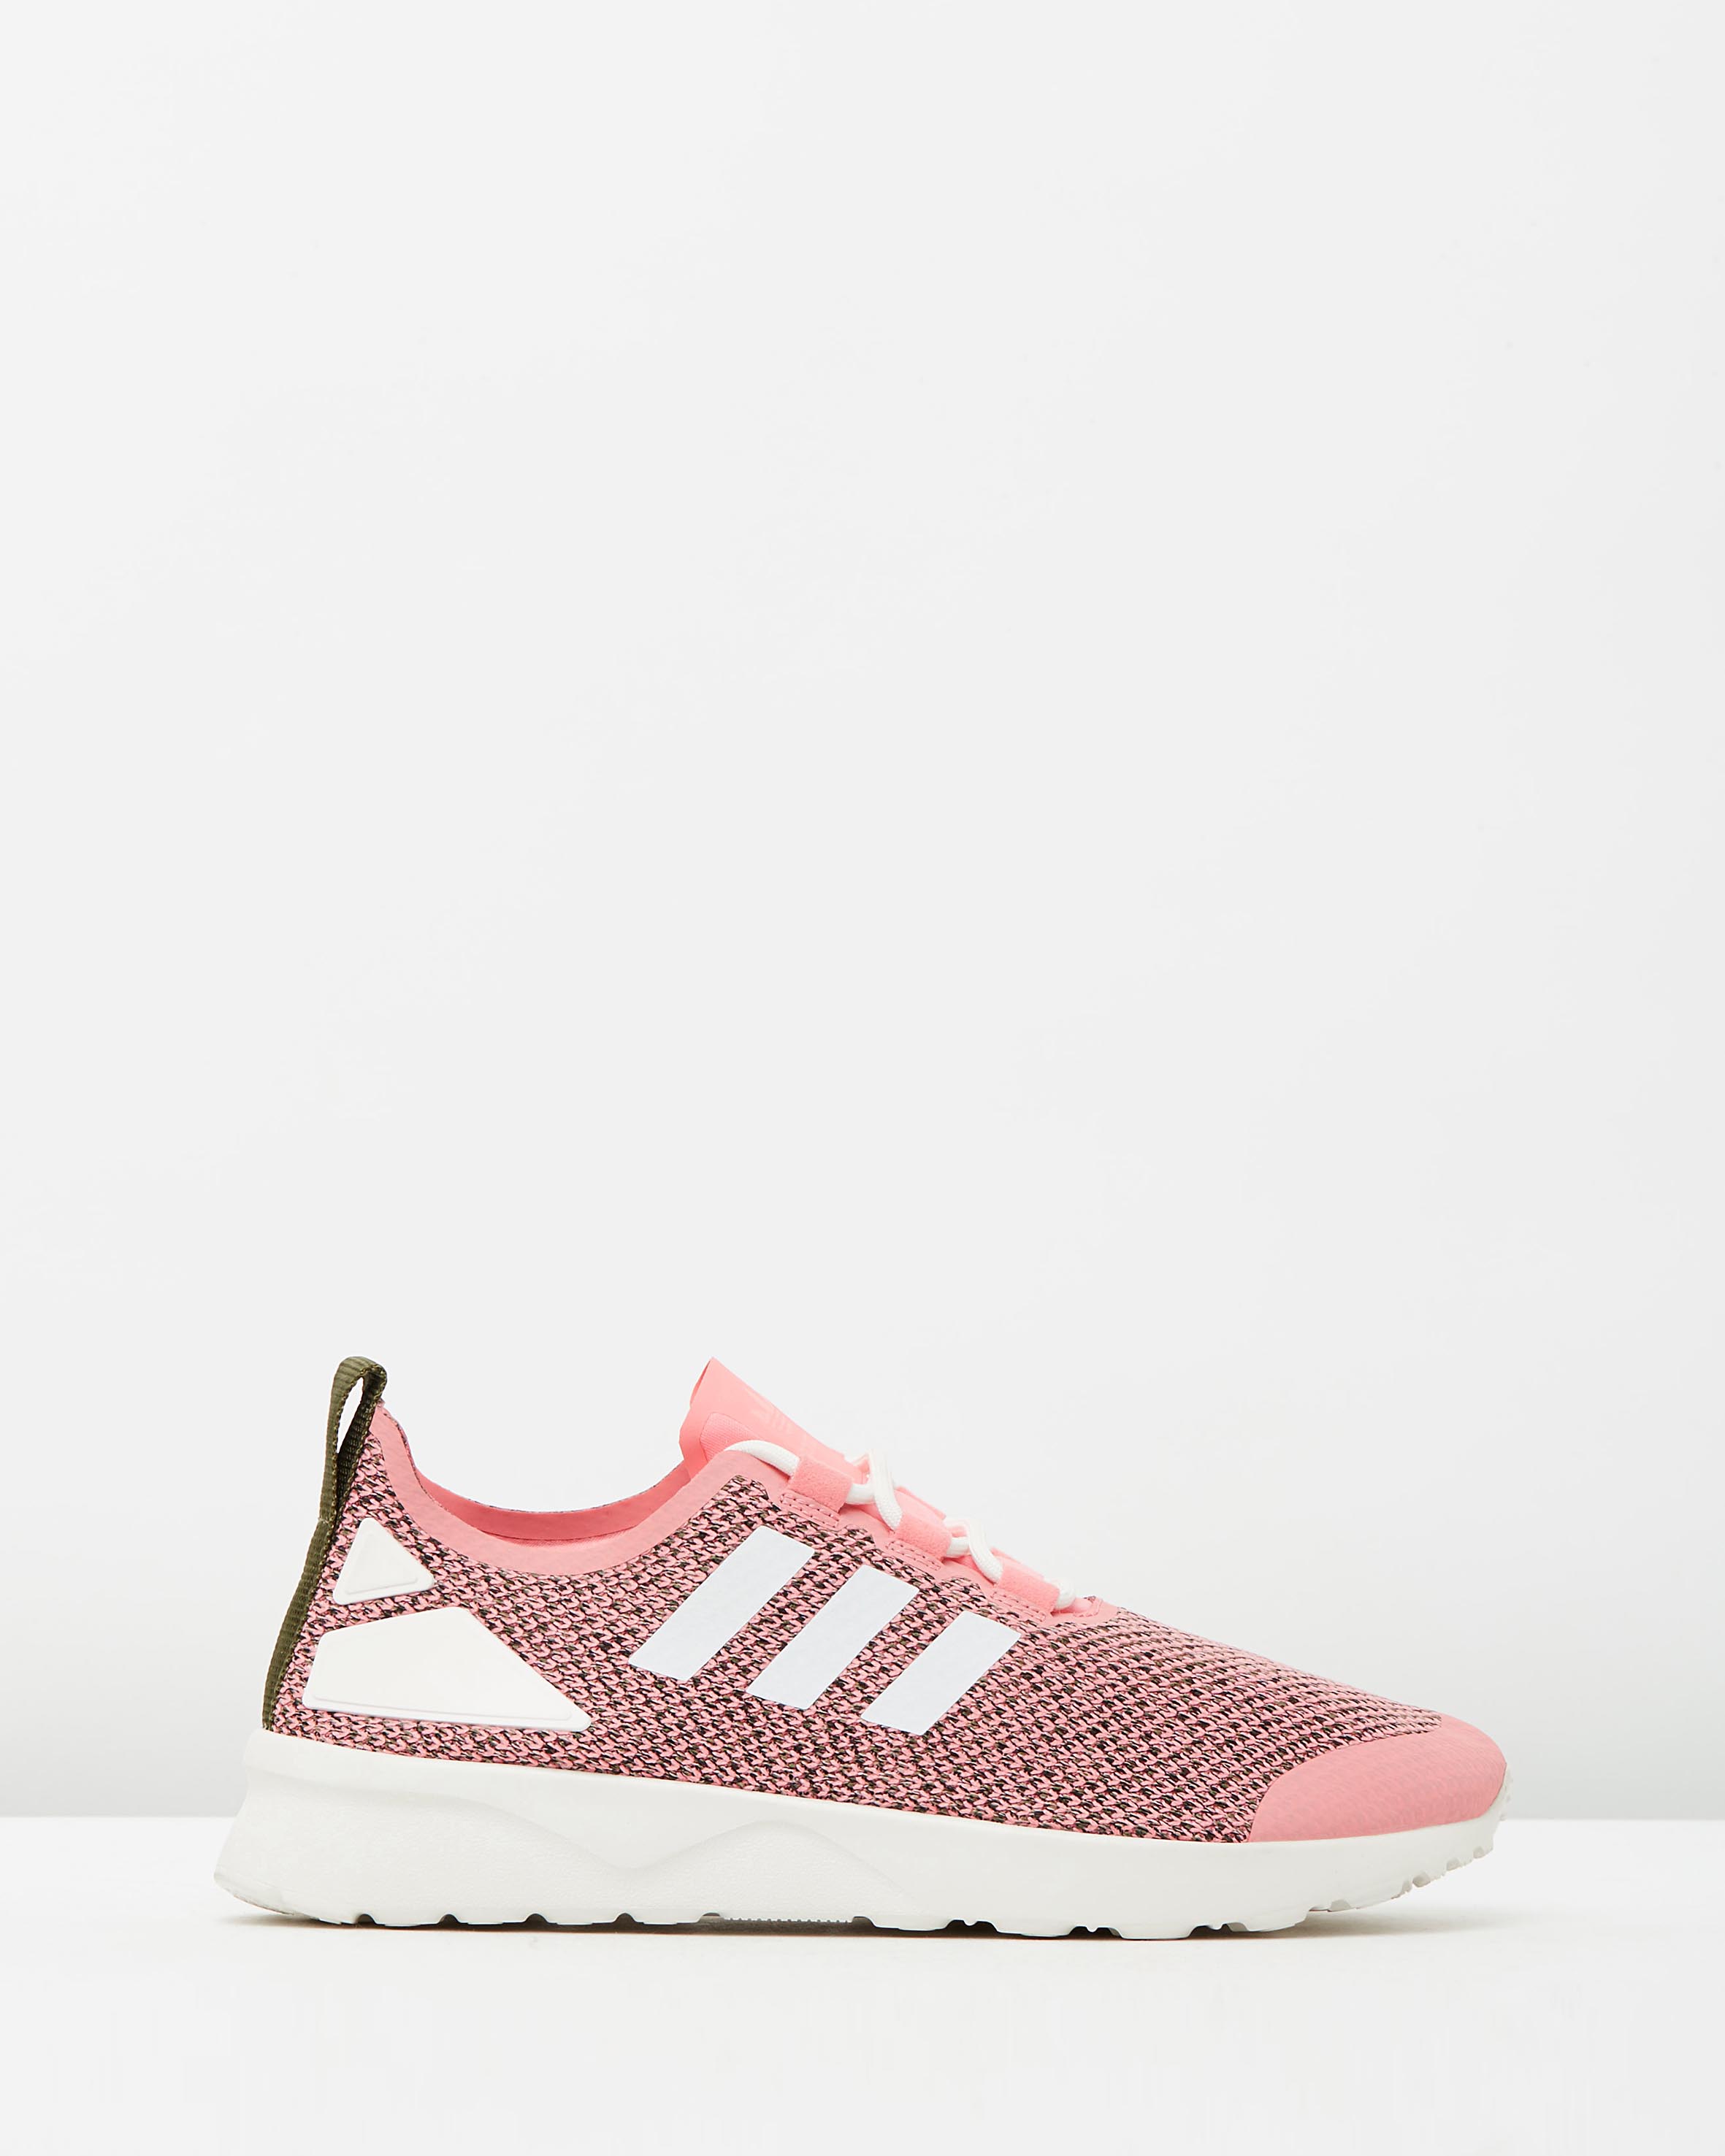 zx flux adidas pink and black